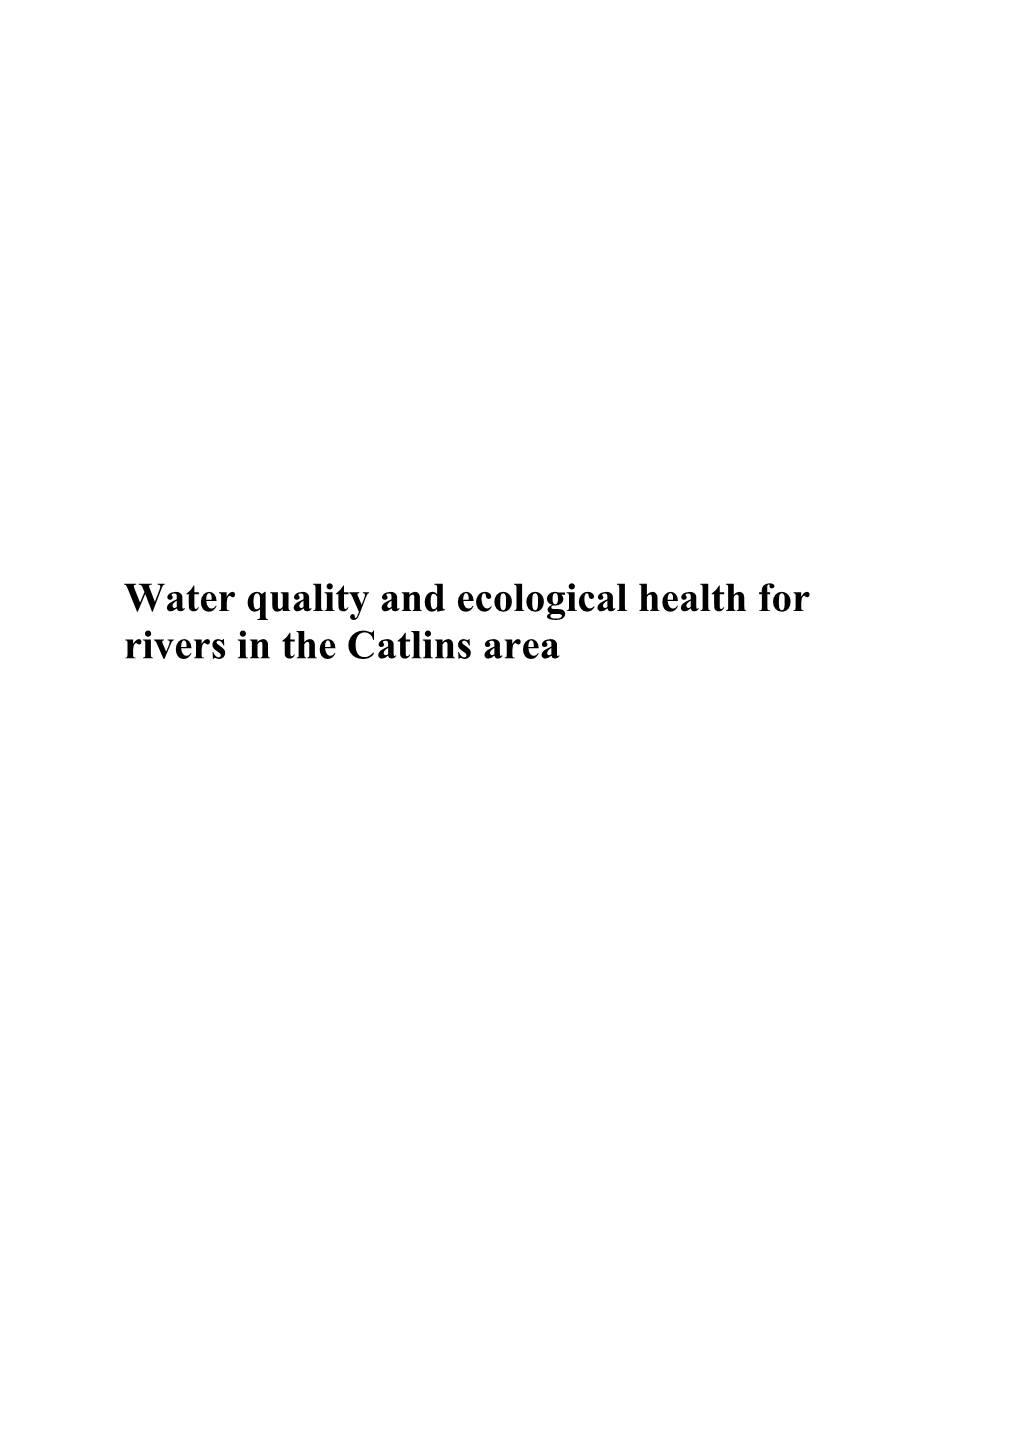 Water Quality and Ecological Health for Rivers in the Catlins Area